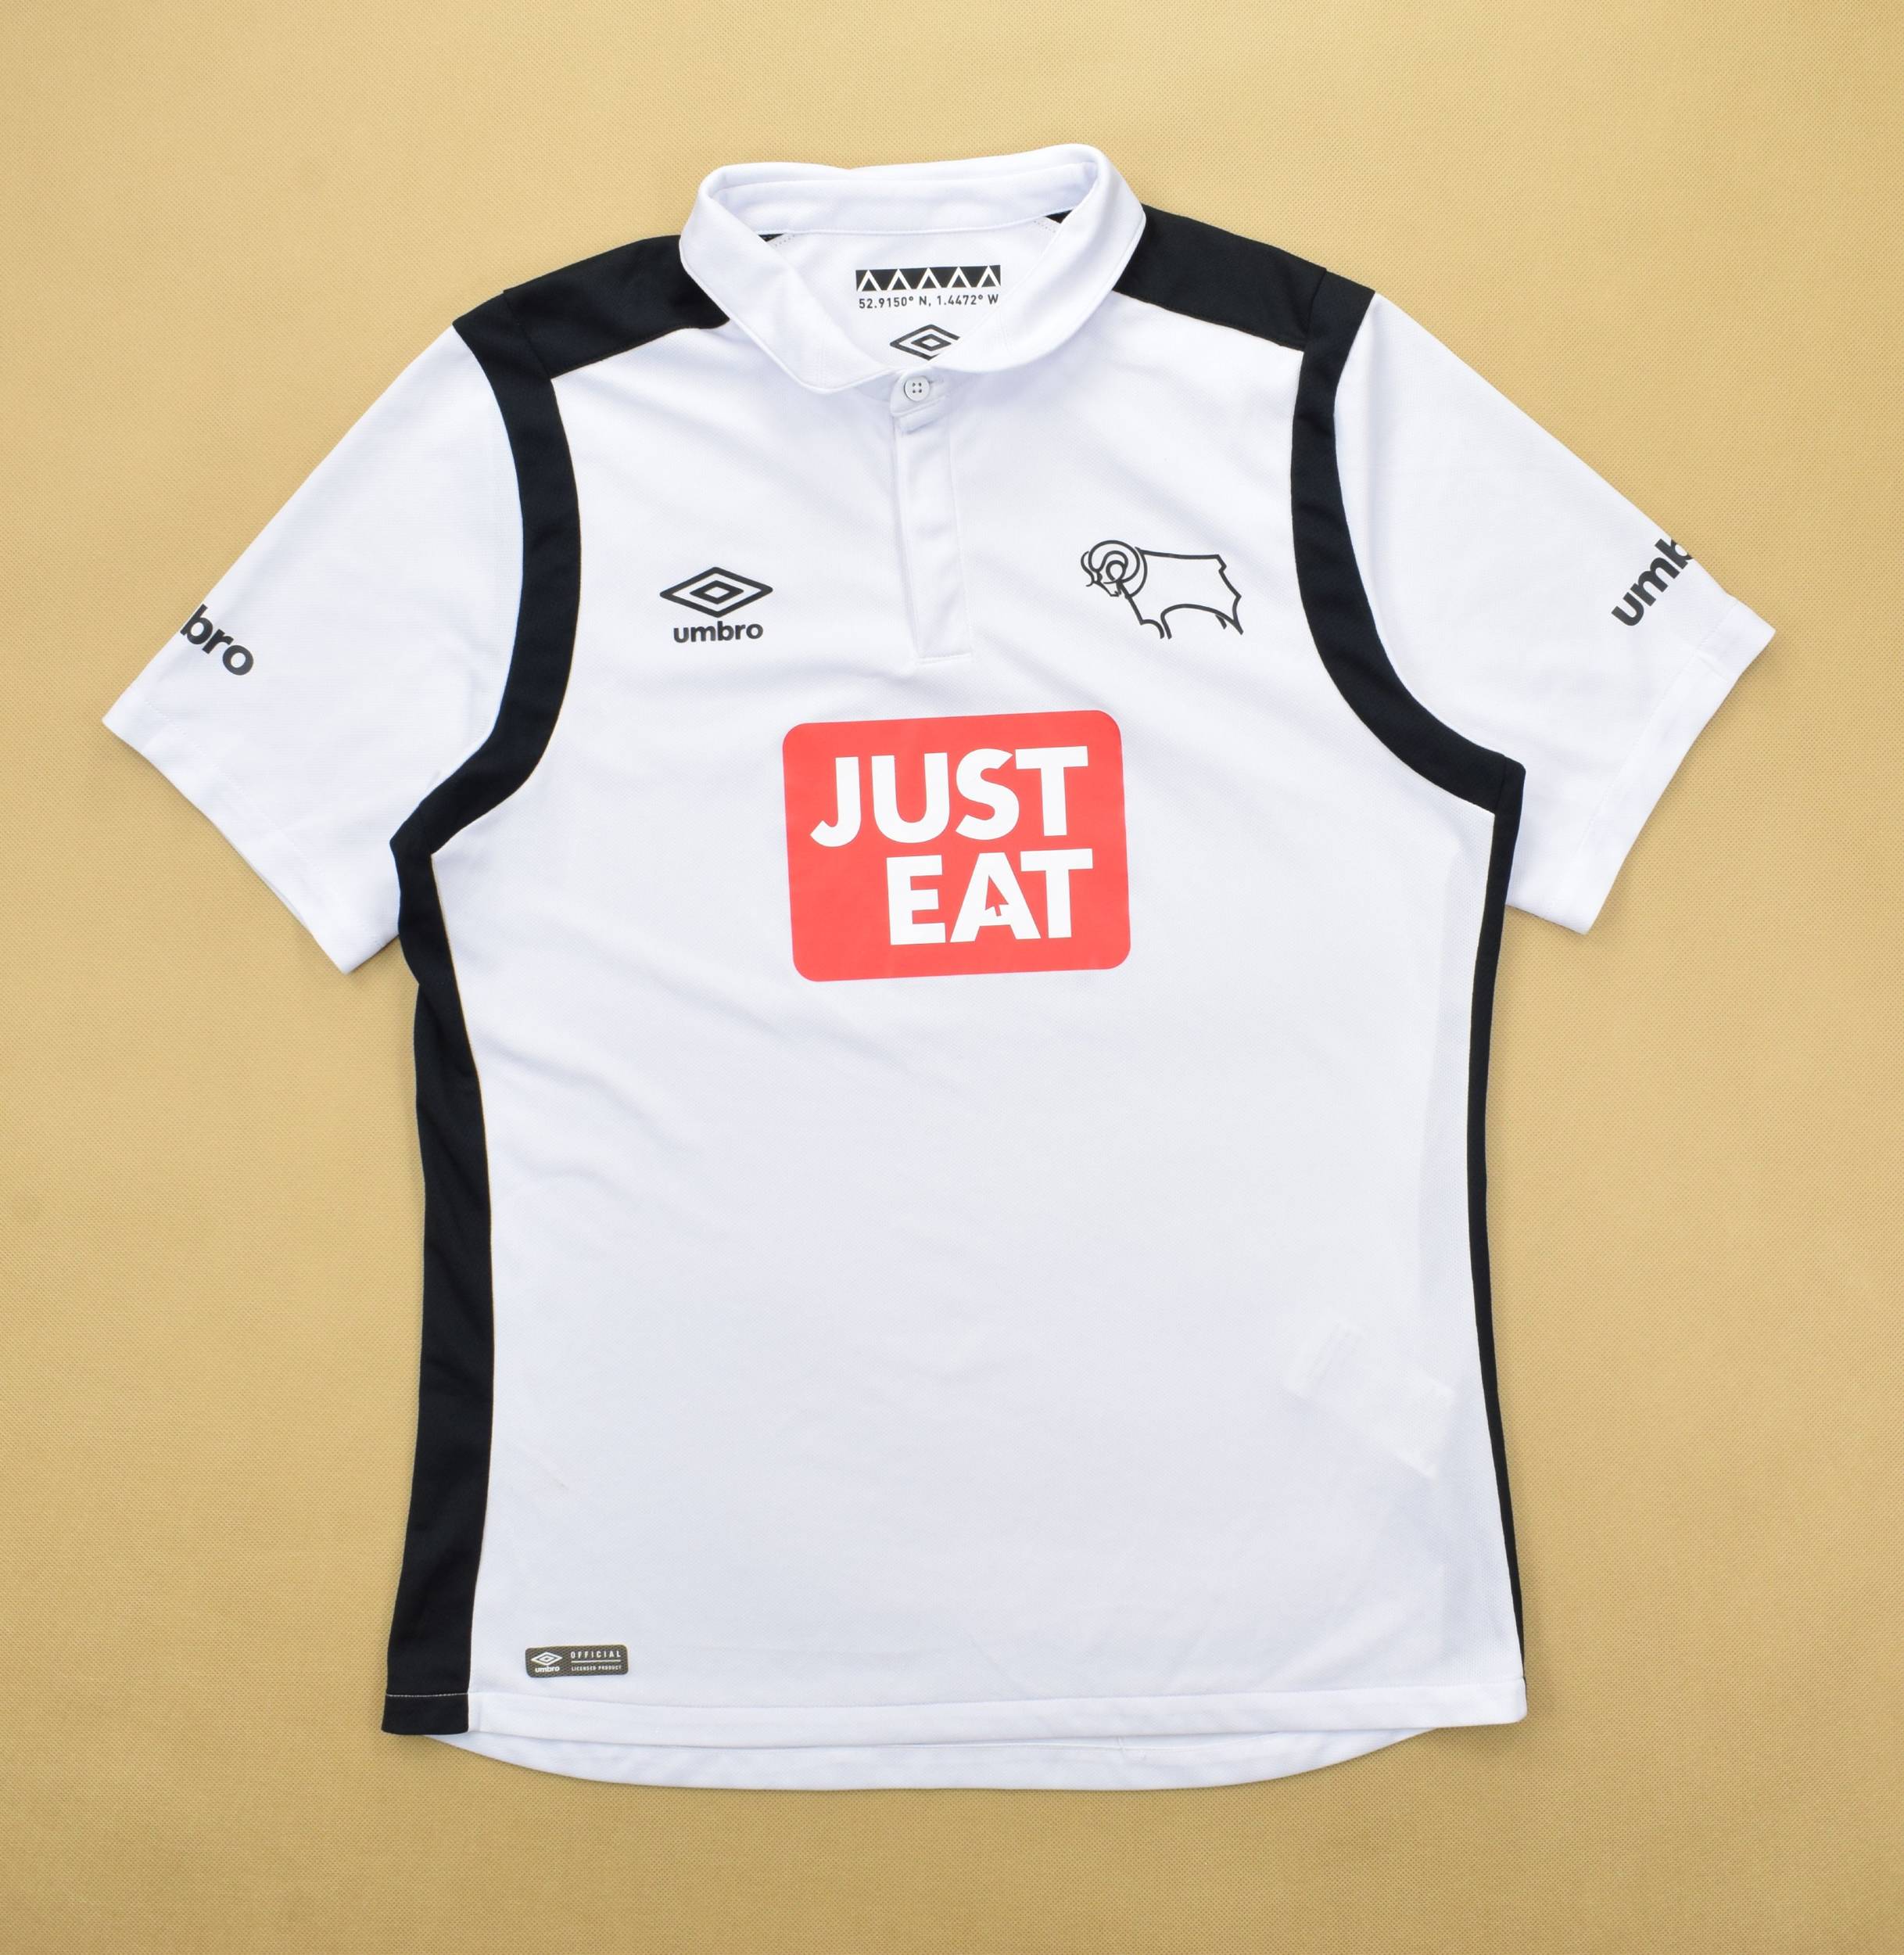 Derby County FC 2016/17 Umbro Home Kit - FOOTBALL FASHION